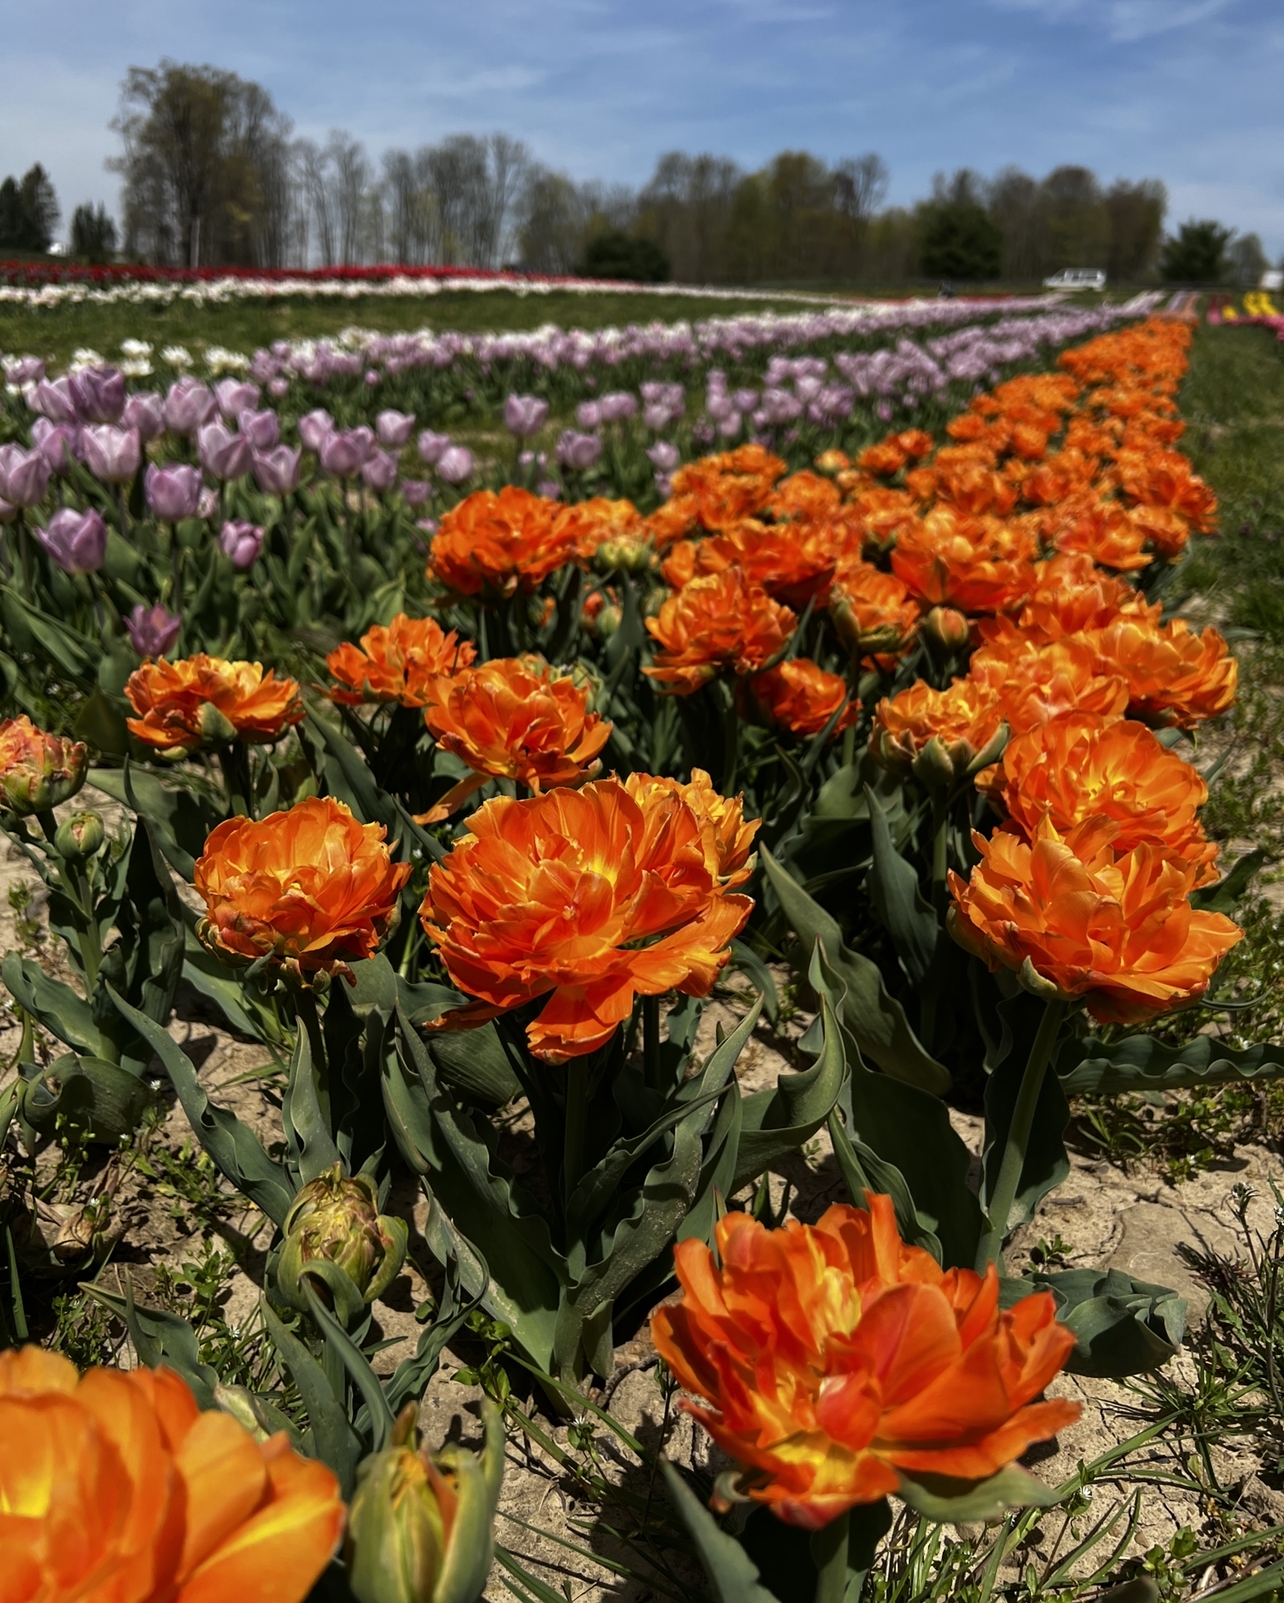 Tip-Toe Through the Tulips: Our Amazing Day at Timbuku Farms’ Tulip Festival